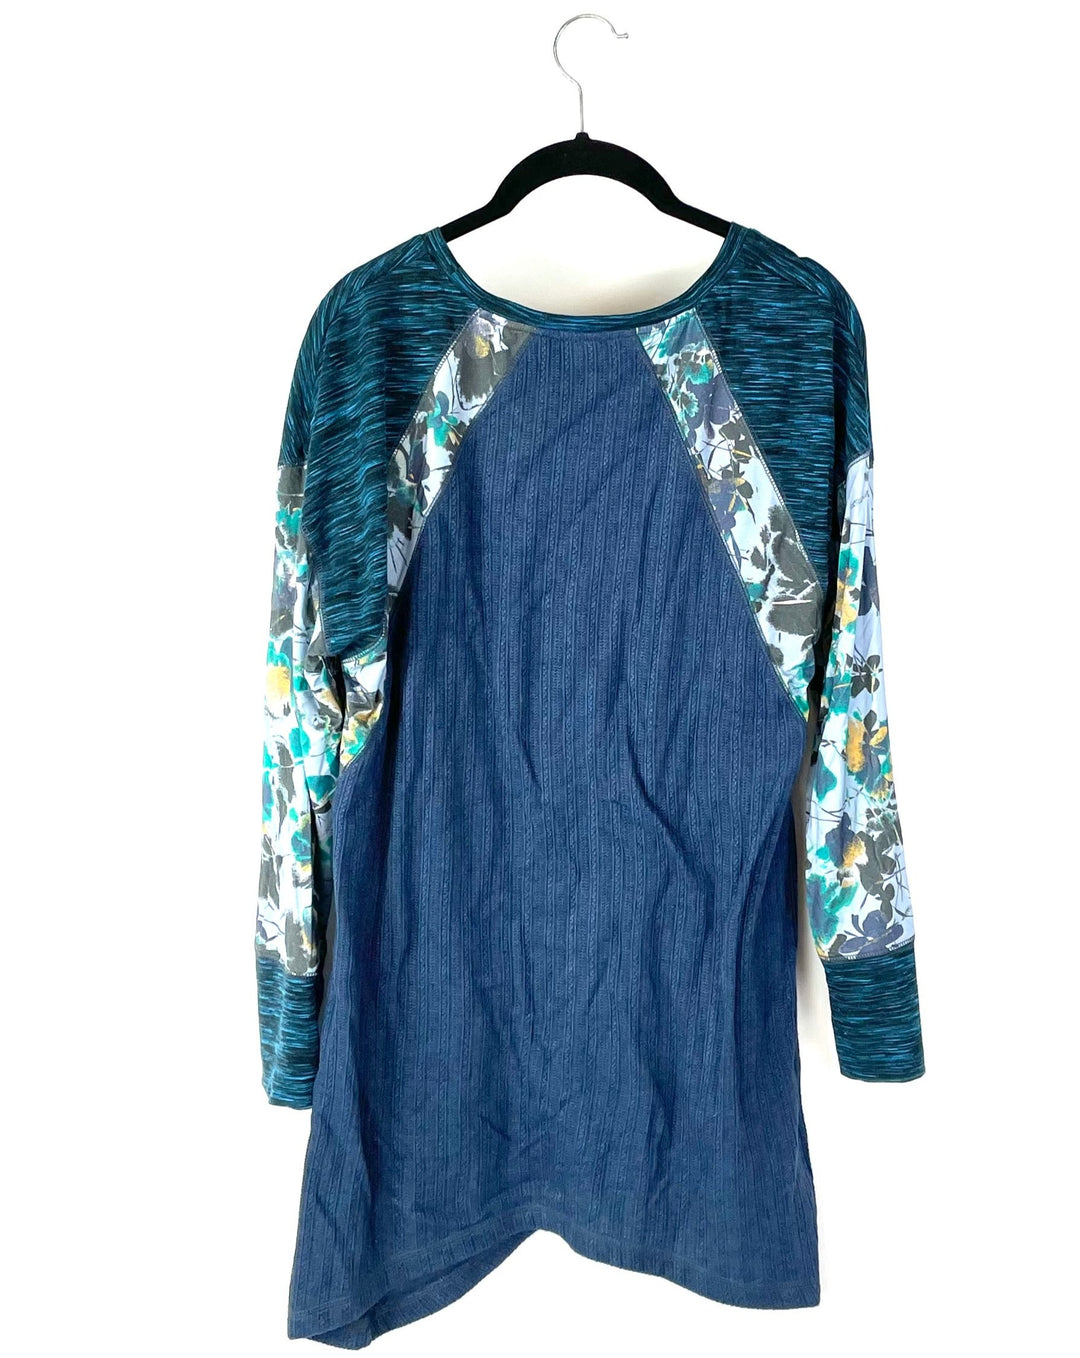 Blue Long Sleeve Top - Size 6-8